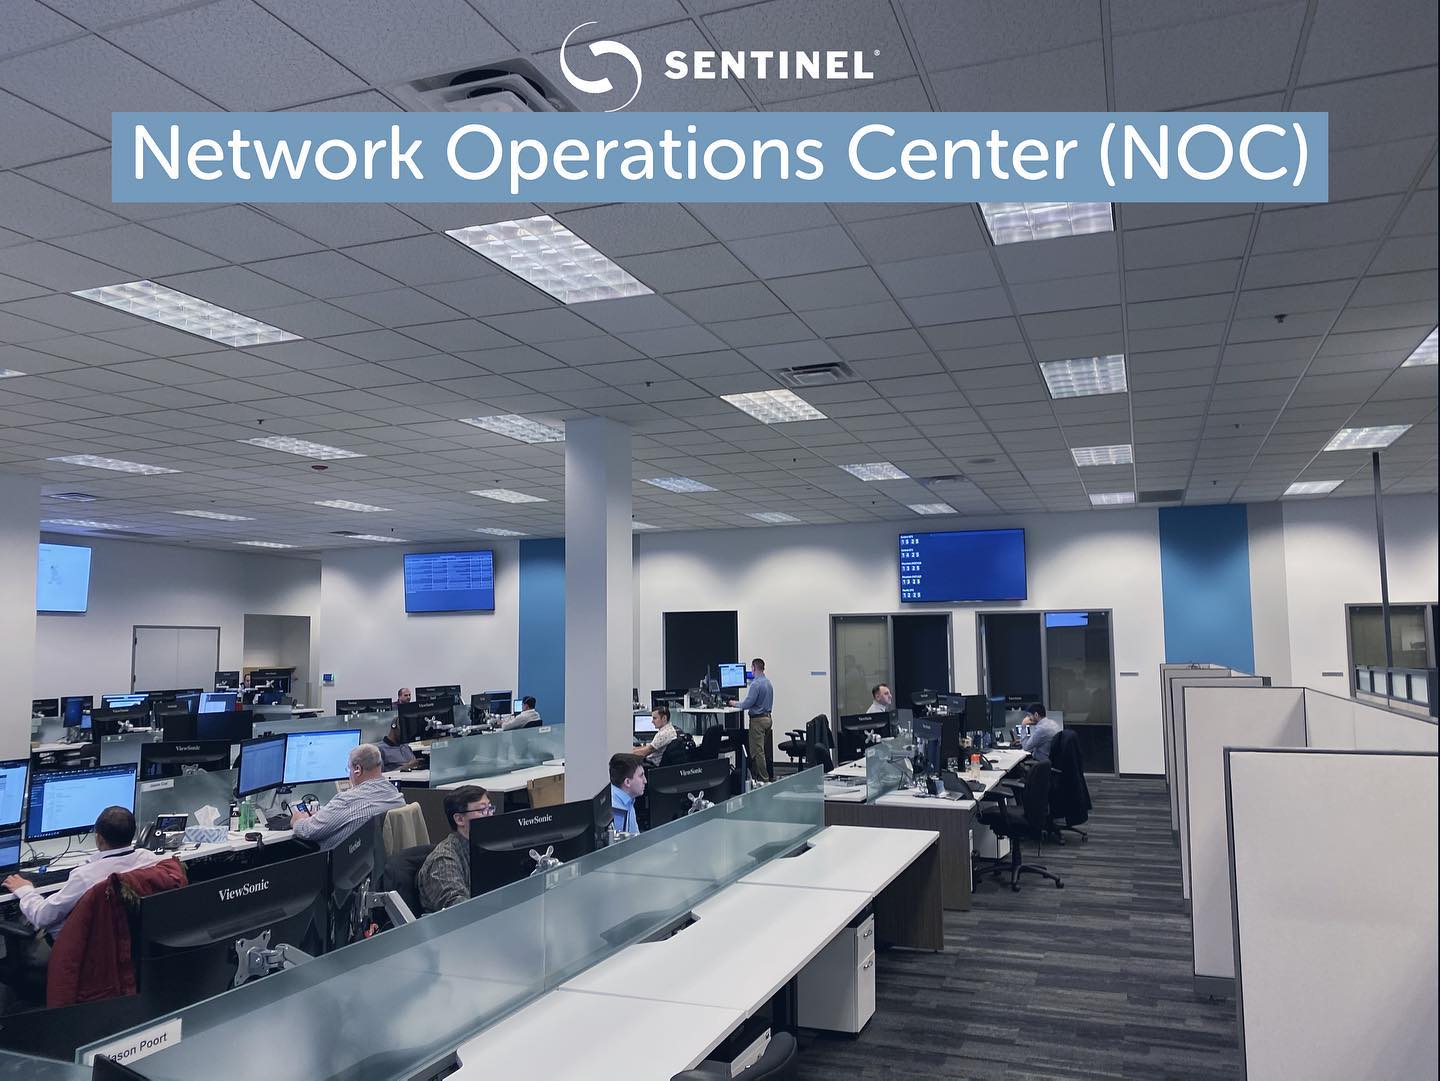 Our Network Operations Center is a 24-hour operation that serves our customers.